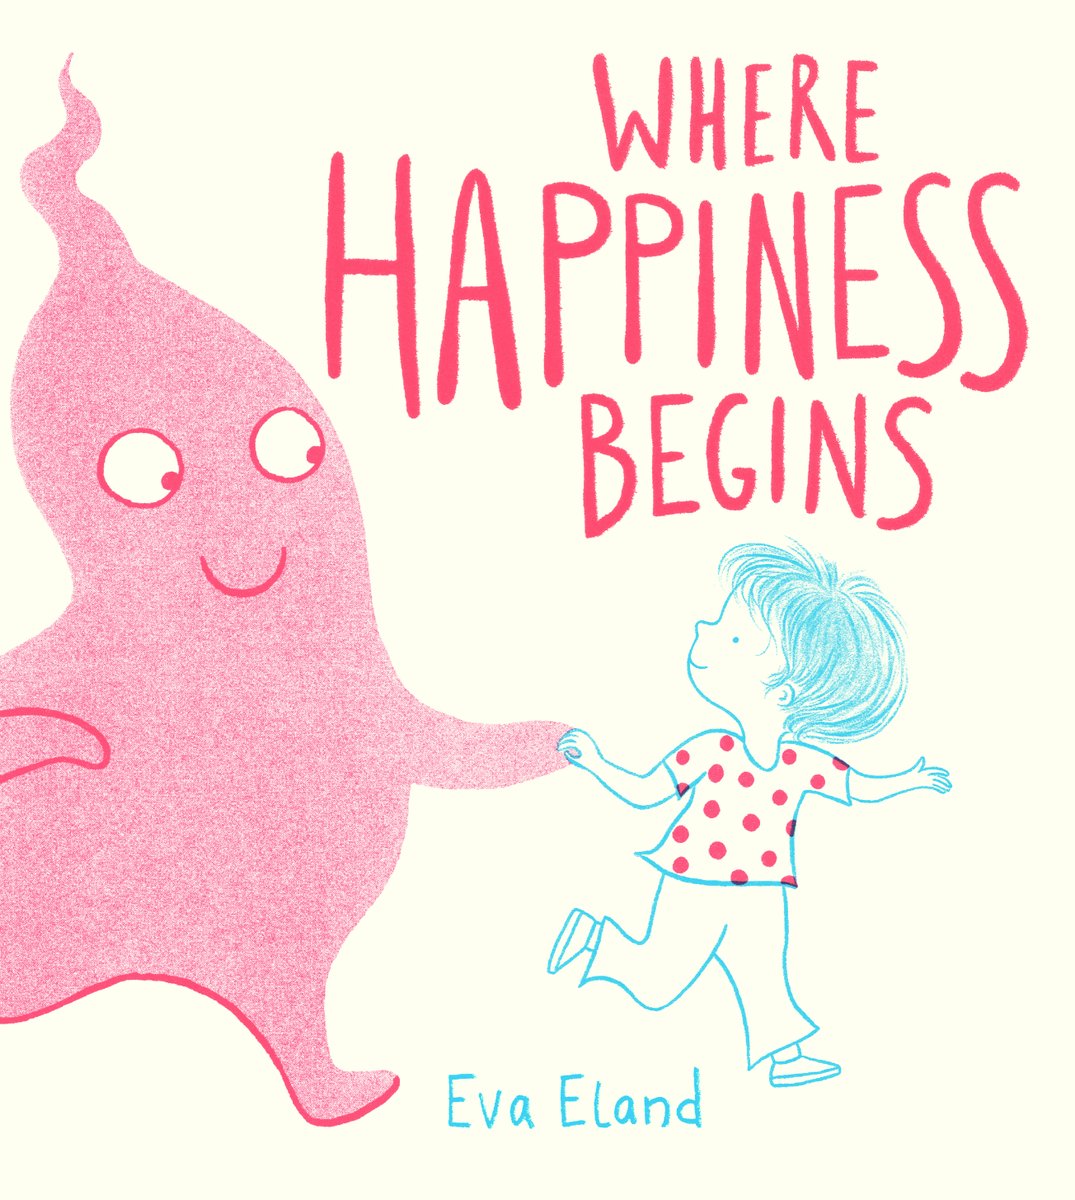 Join the procession for our family storywalks this Easter, inspired by @EvaEland's beautiful Where Happiness Begins. Book free tickets at ticketsource.co.uk/kirkleeslibrar… Where Happiness Begins © Eva Eland #Holmfirth #Cleckheaton #Meltham #Birstall #Slaithwaite #Almondbury #Golcar